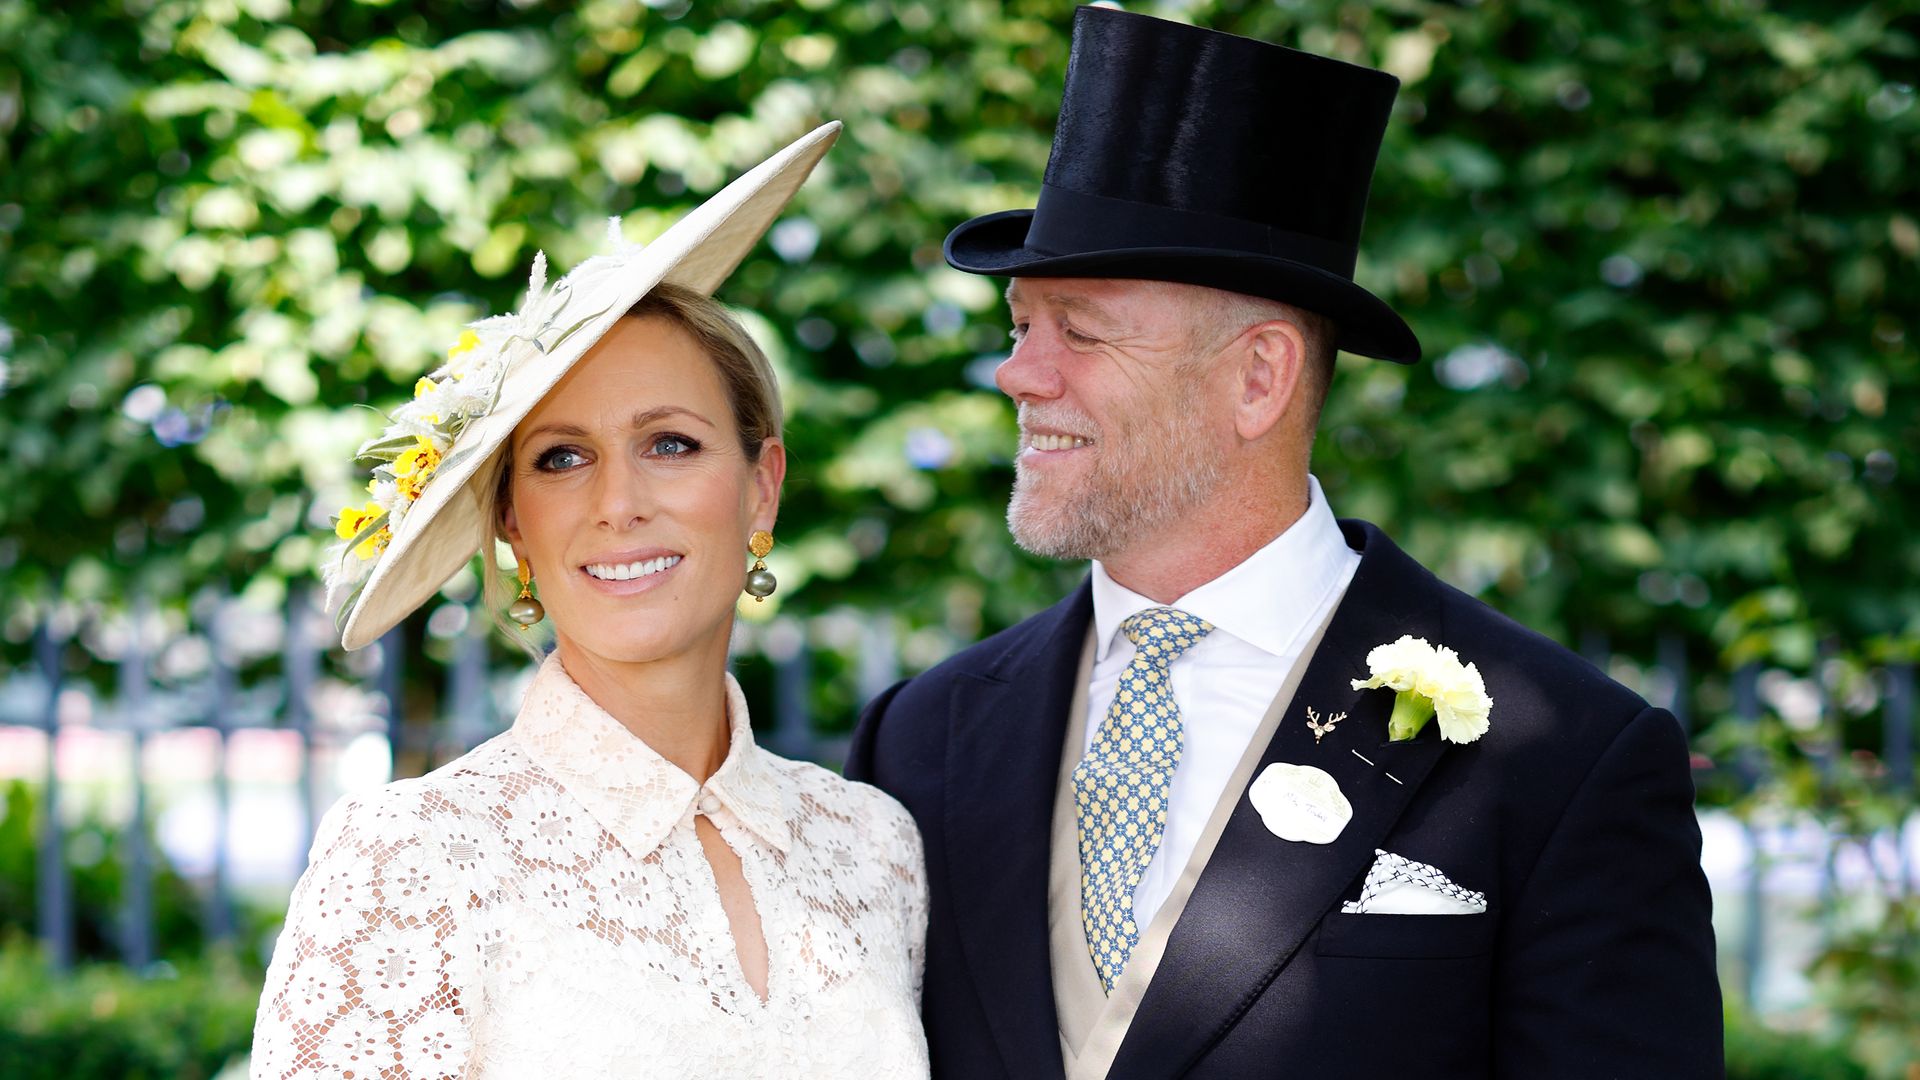  Zara Tindall and Mike Tindall attend day 3 'Ladies Day' of Royal Ascot 2023 at Ascot Racecourse on June 22, 2023 